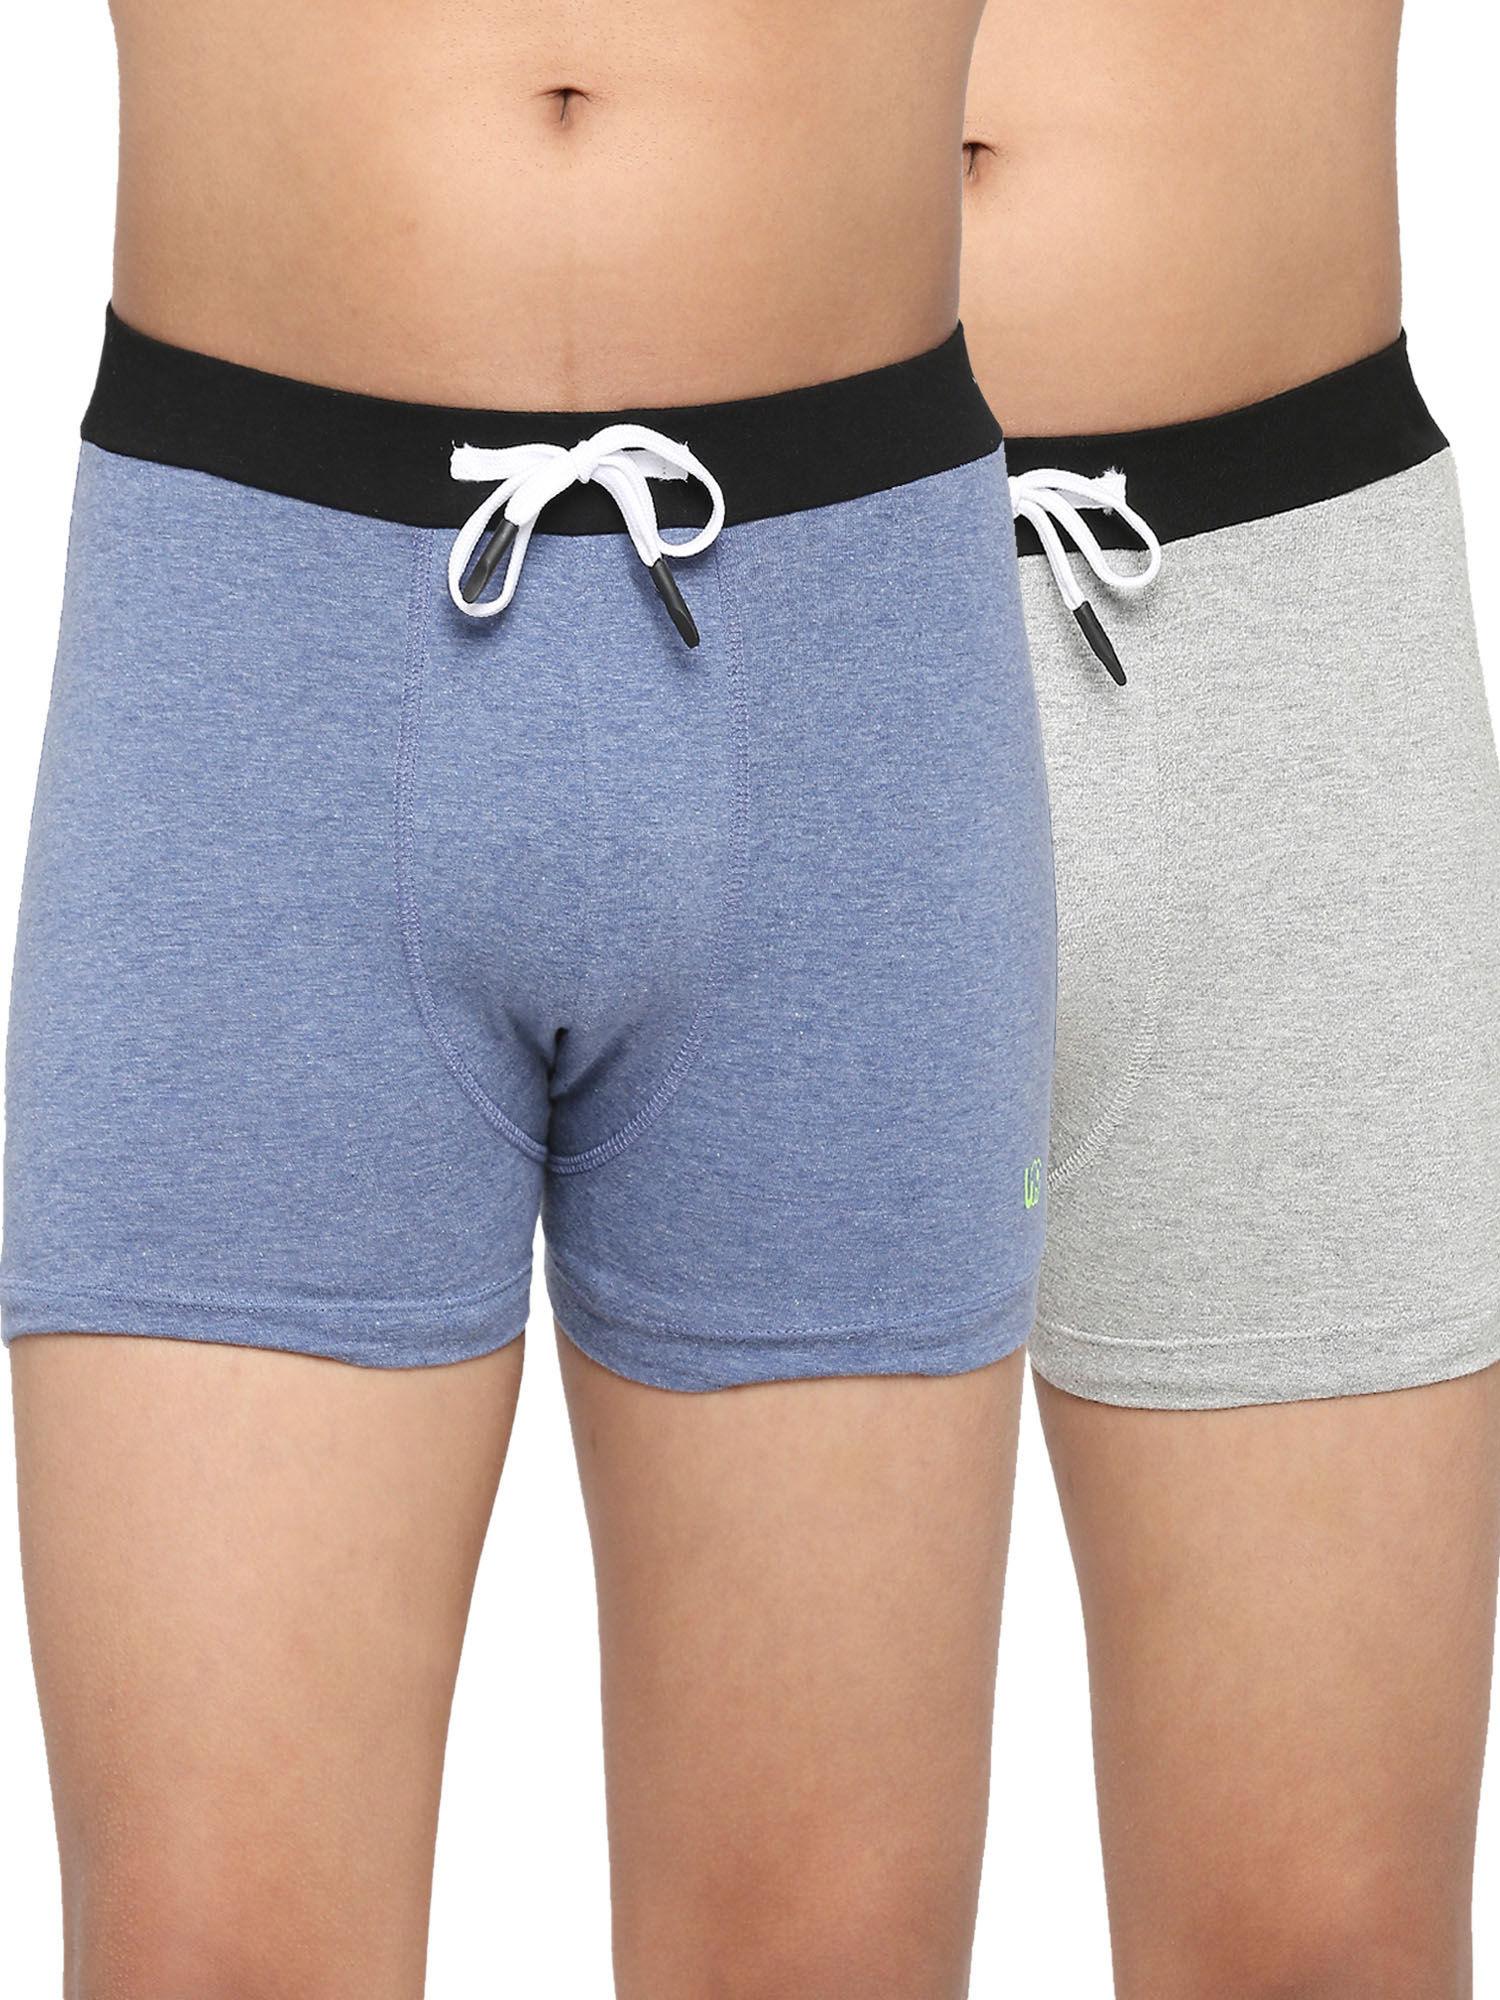 teenagers-cotton-trunk-light-grey-and-blue-(pack-of-2)